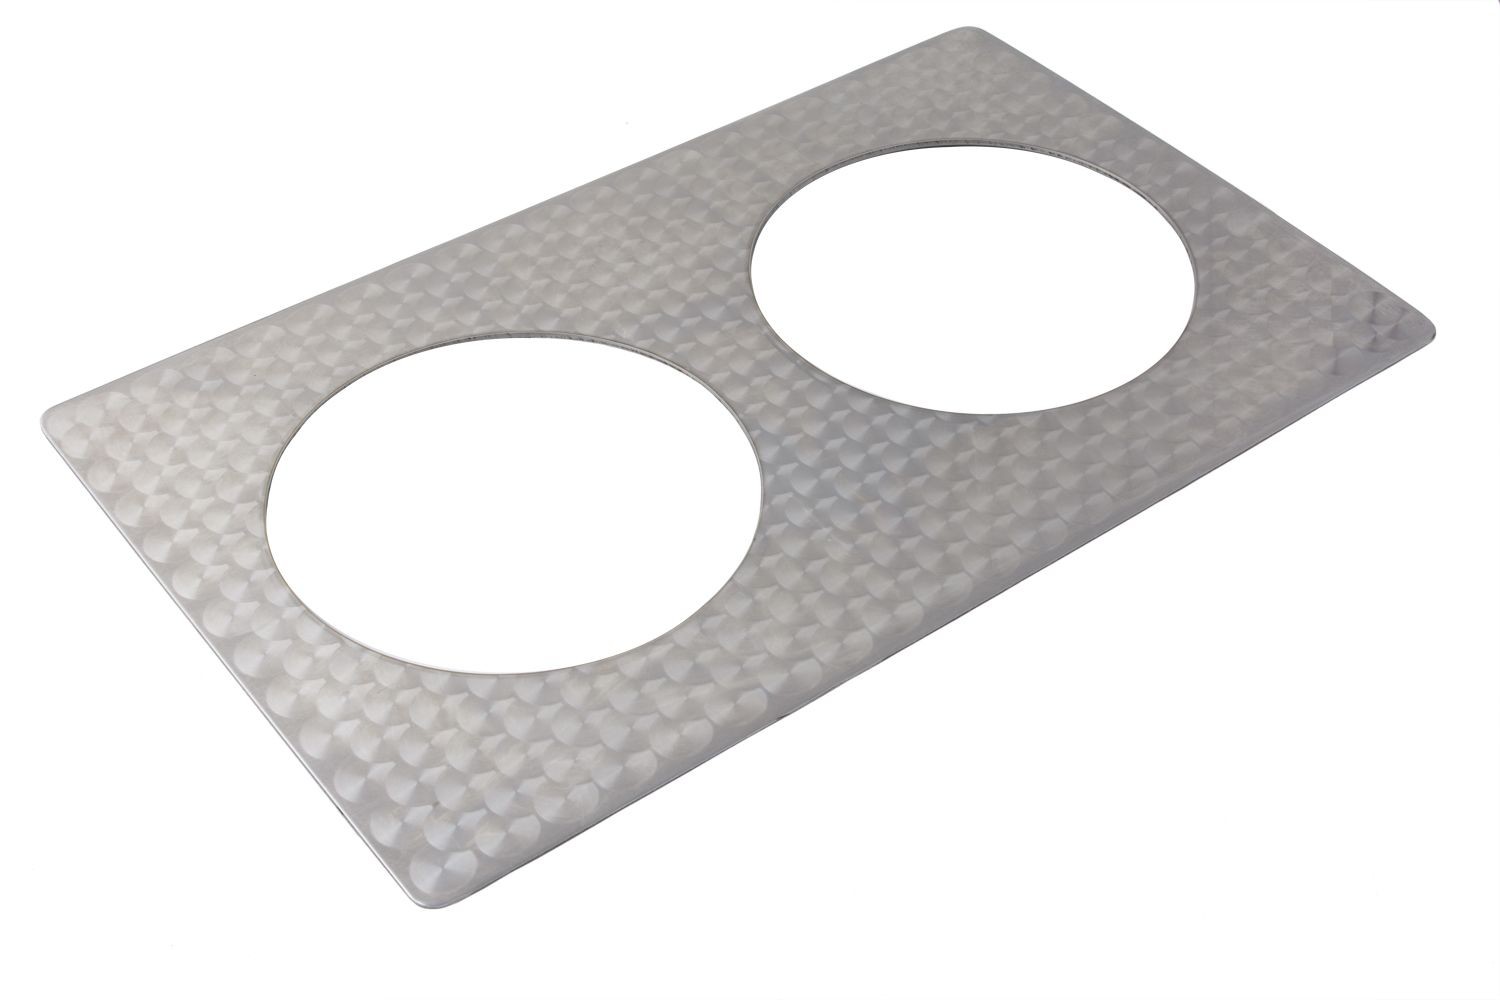 Bon Chef 52109262301 EZ Fit Stainless Steel Full Size Tile Inset with Circles for (2) 62301NC, 12 3/4" x 20 13/16"